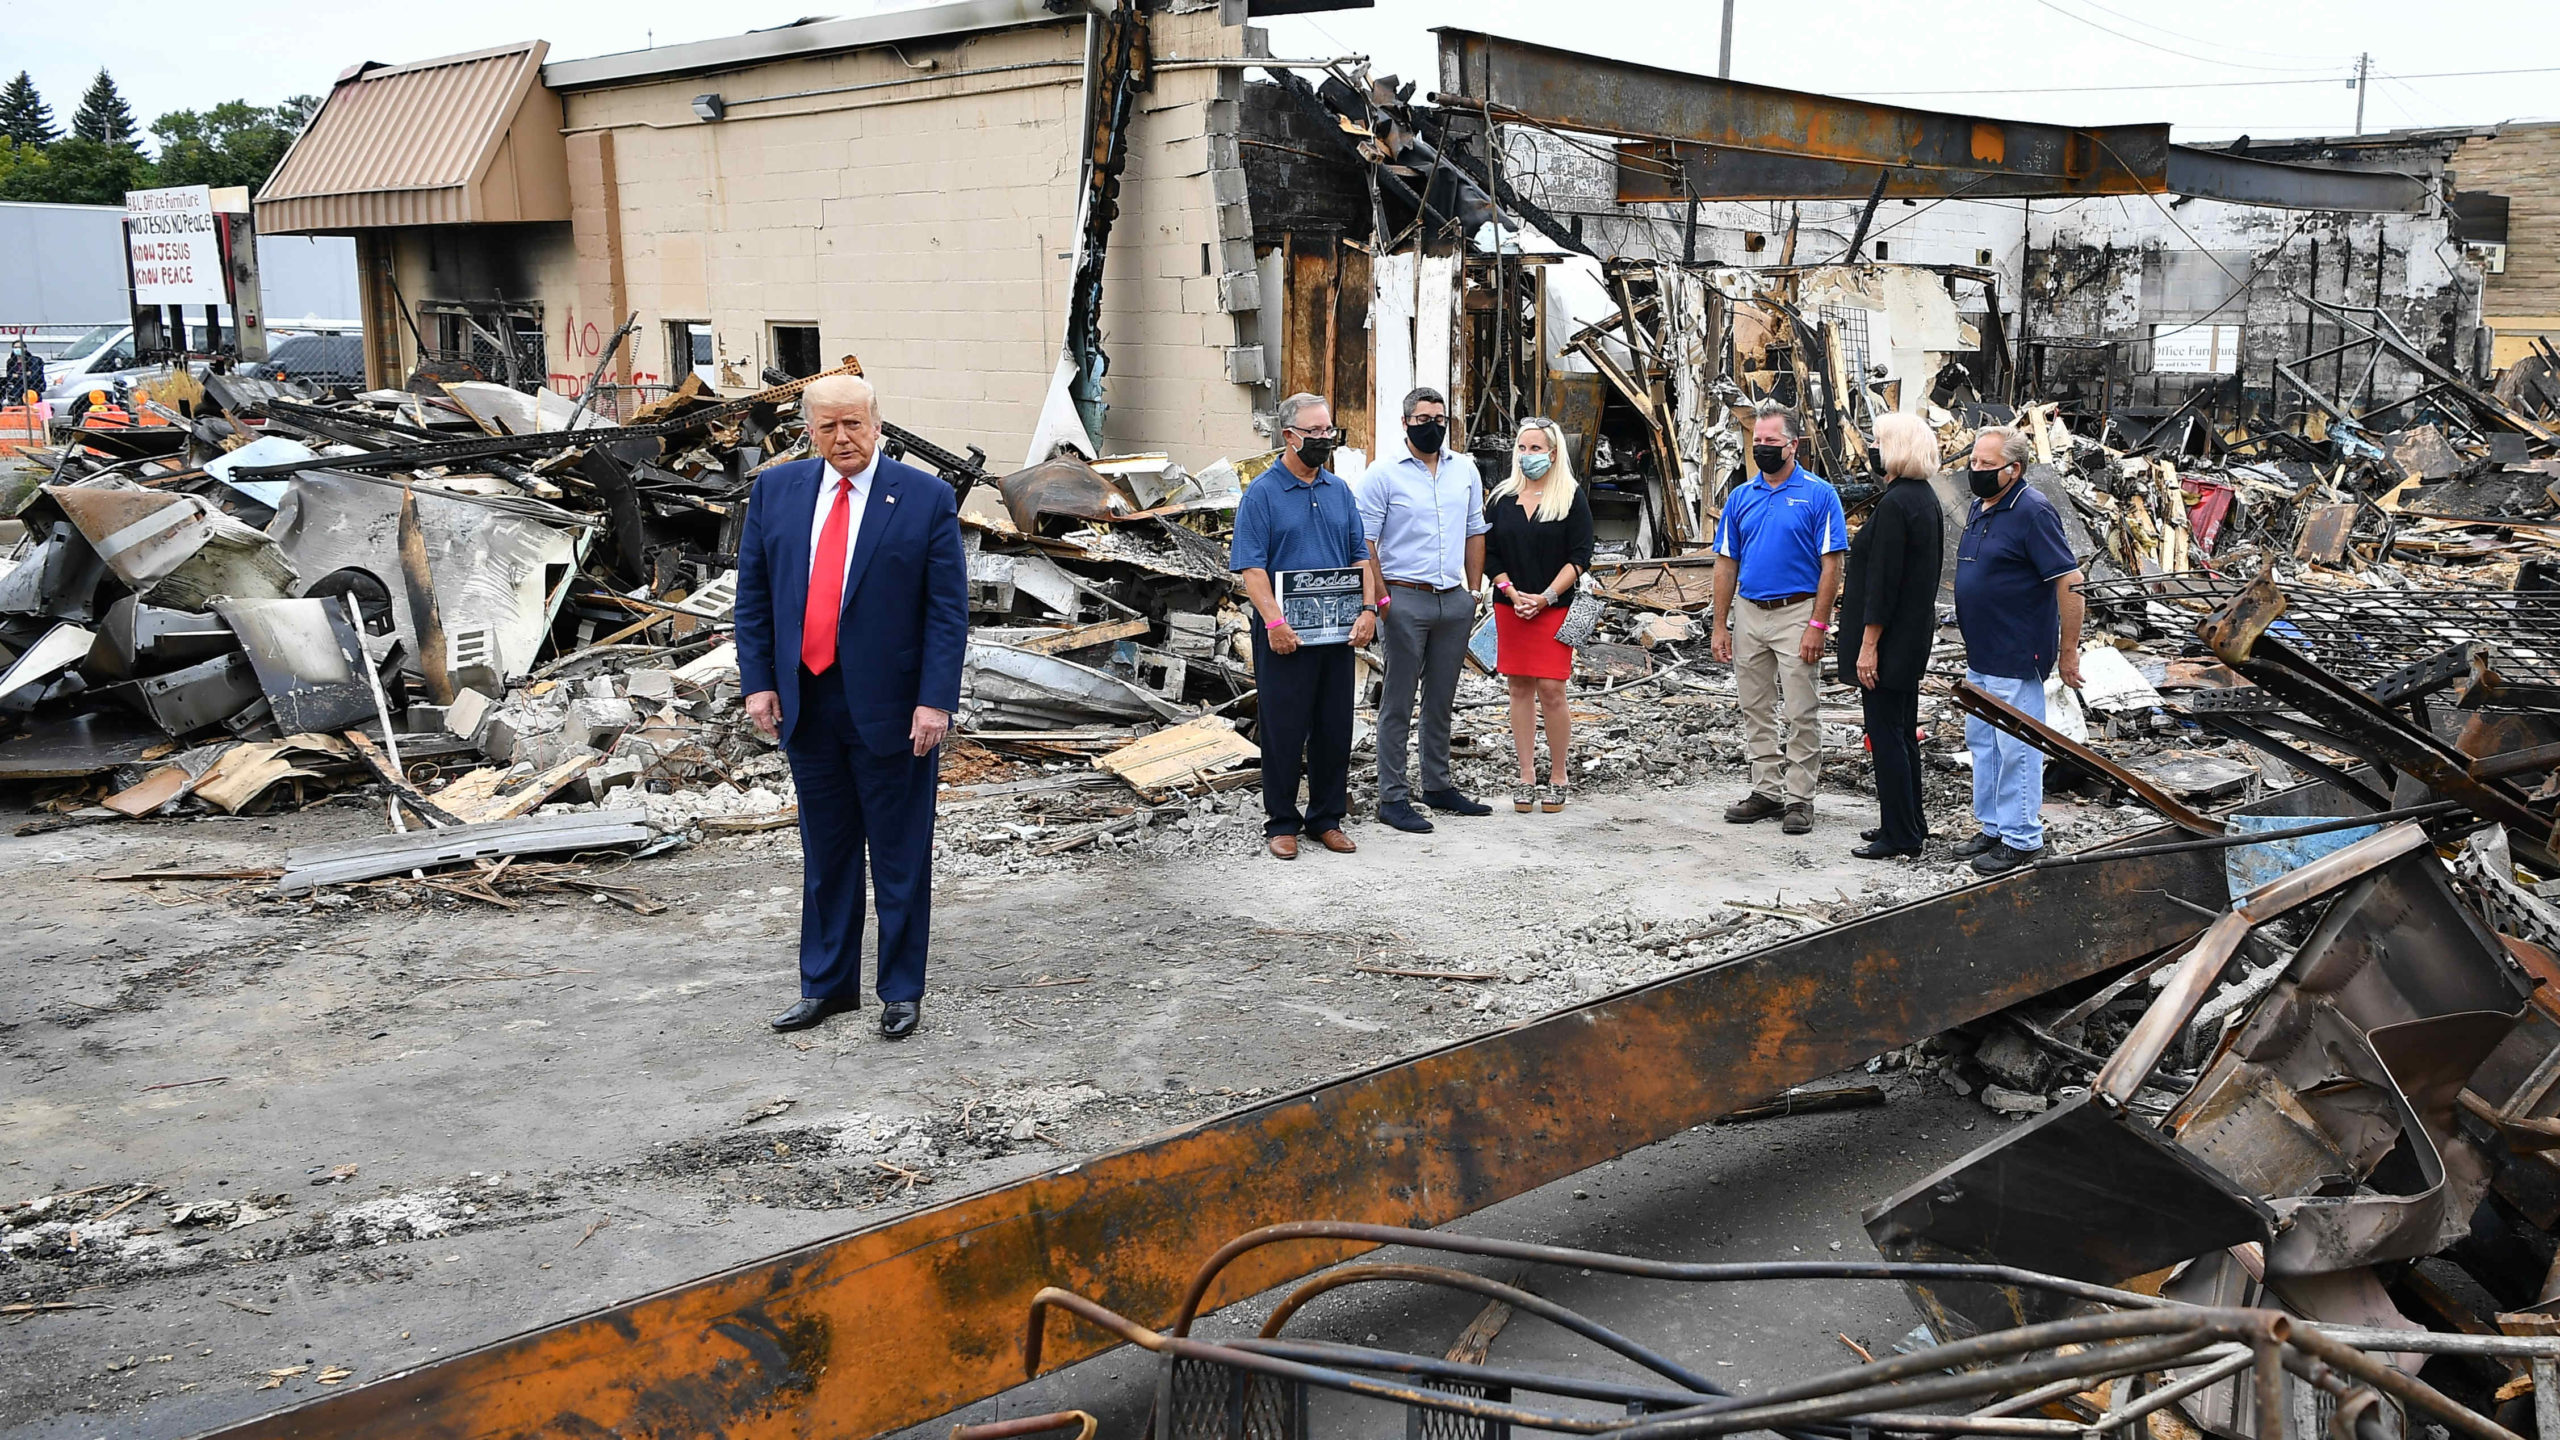 U.S. President Donald Trump tours an area affected by civil unrest in Kenosha, Wisconsin on September 1, 2020 (Photo: Mandel Ngan / AFP, Getty Images)